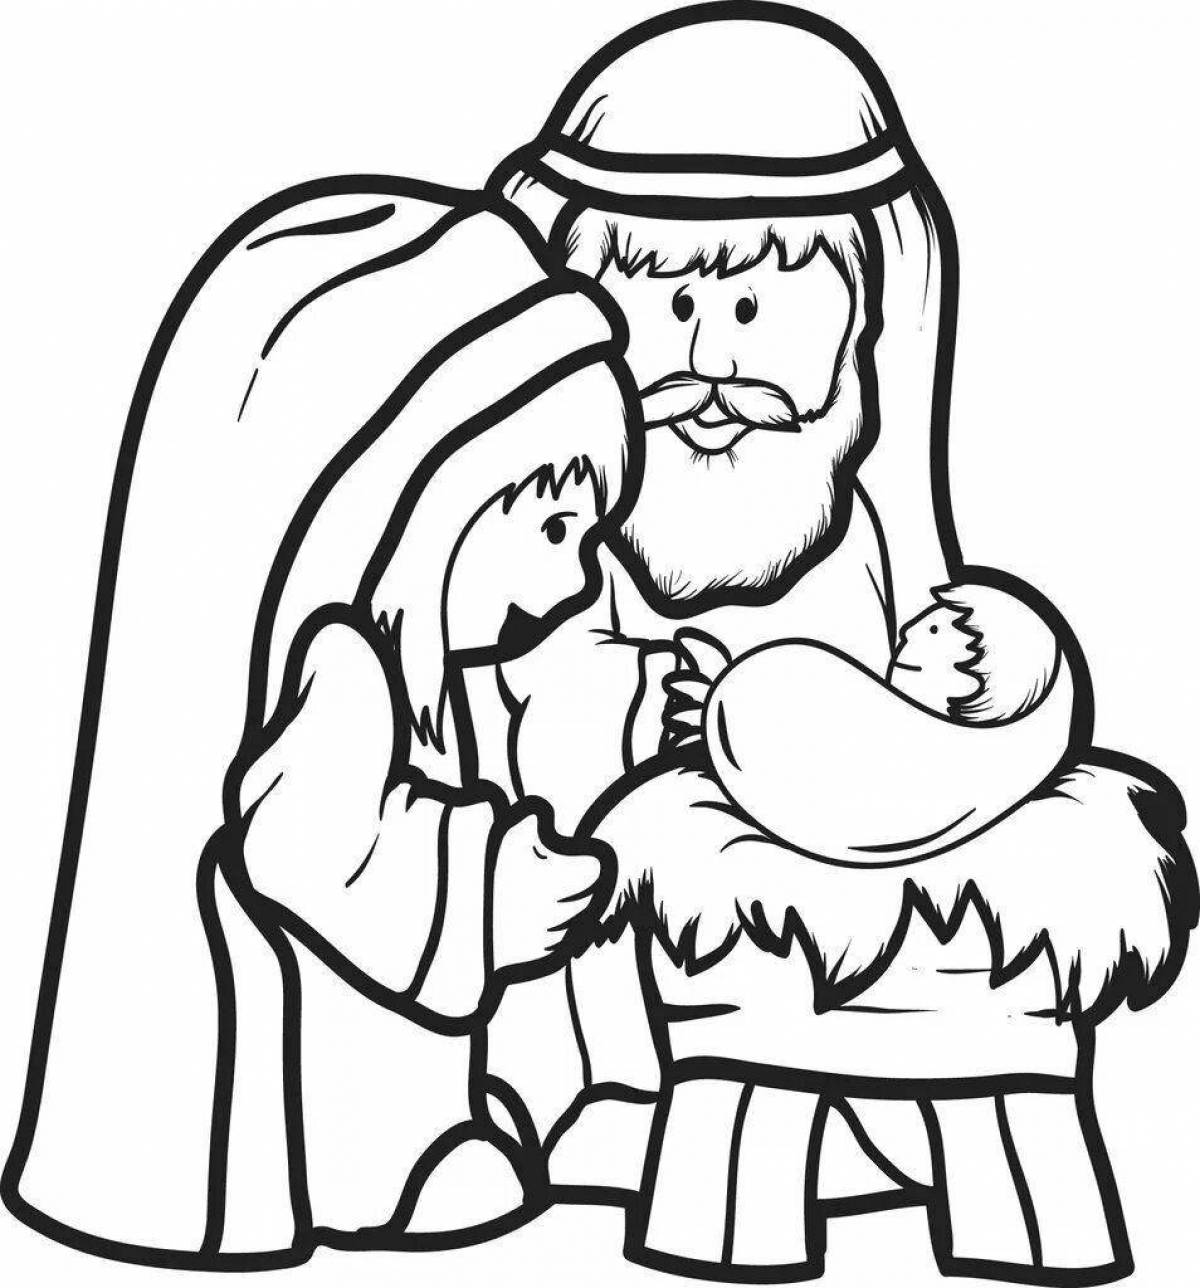 Coloring page heavenly birth of christ